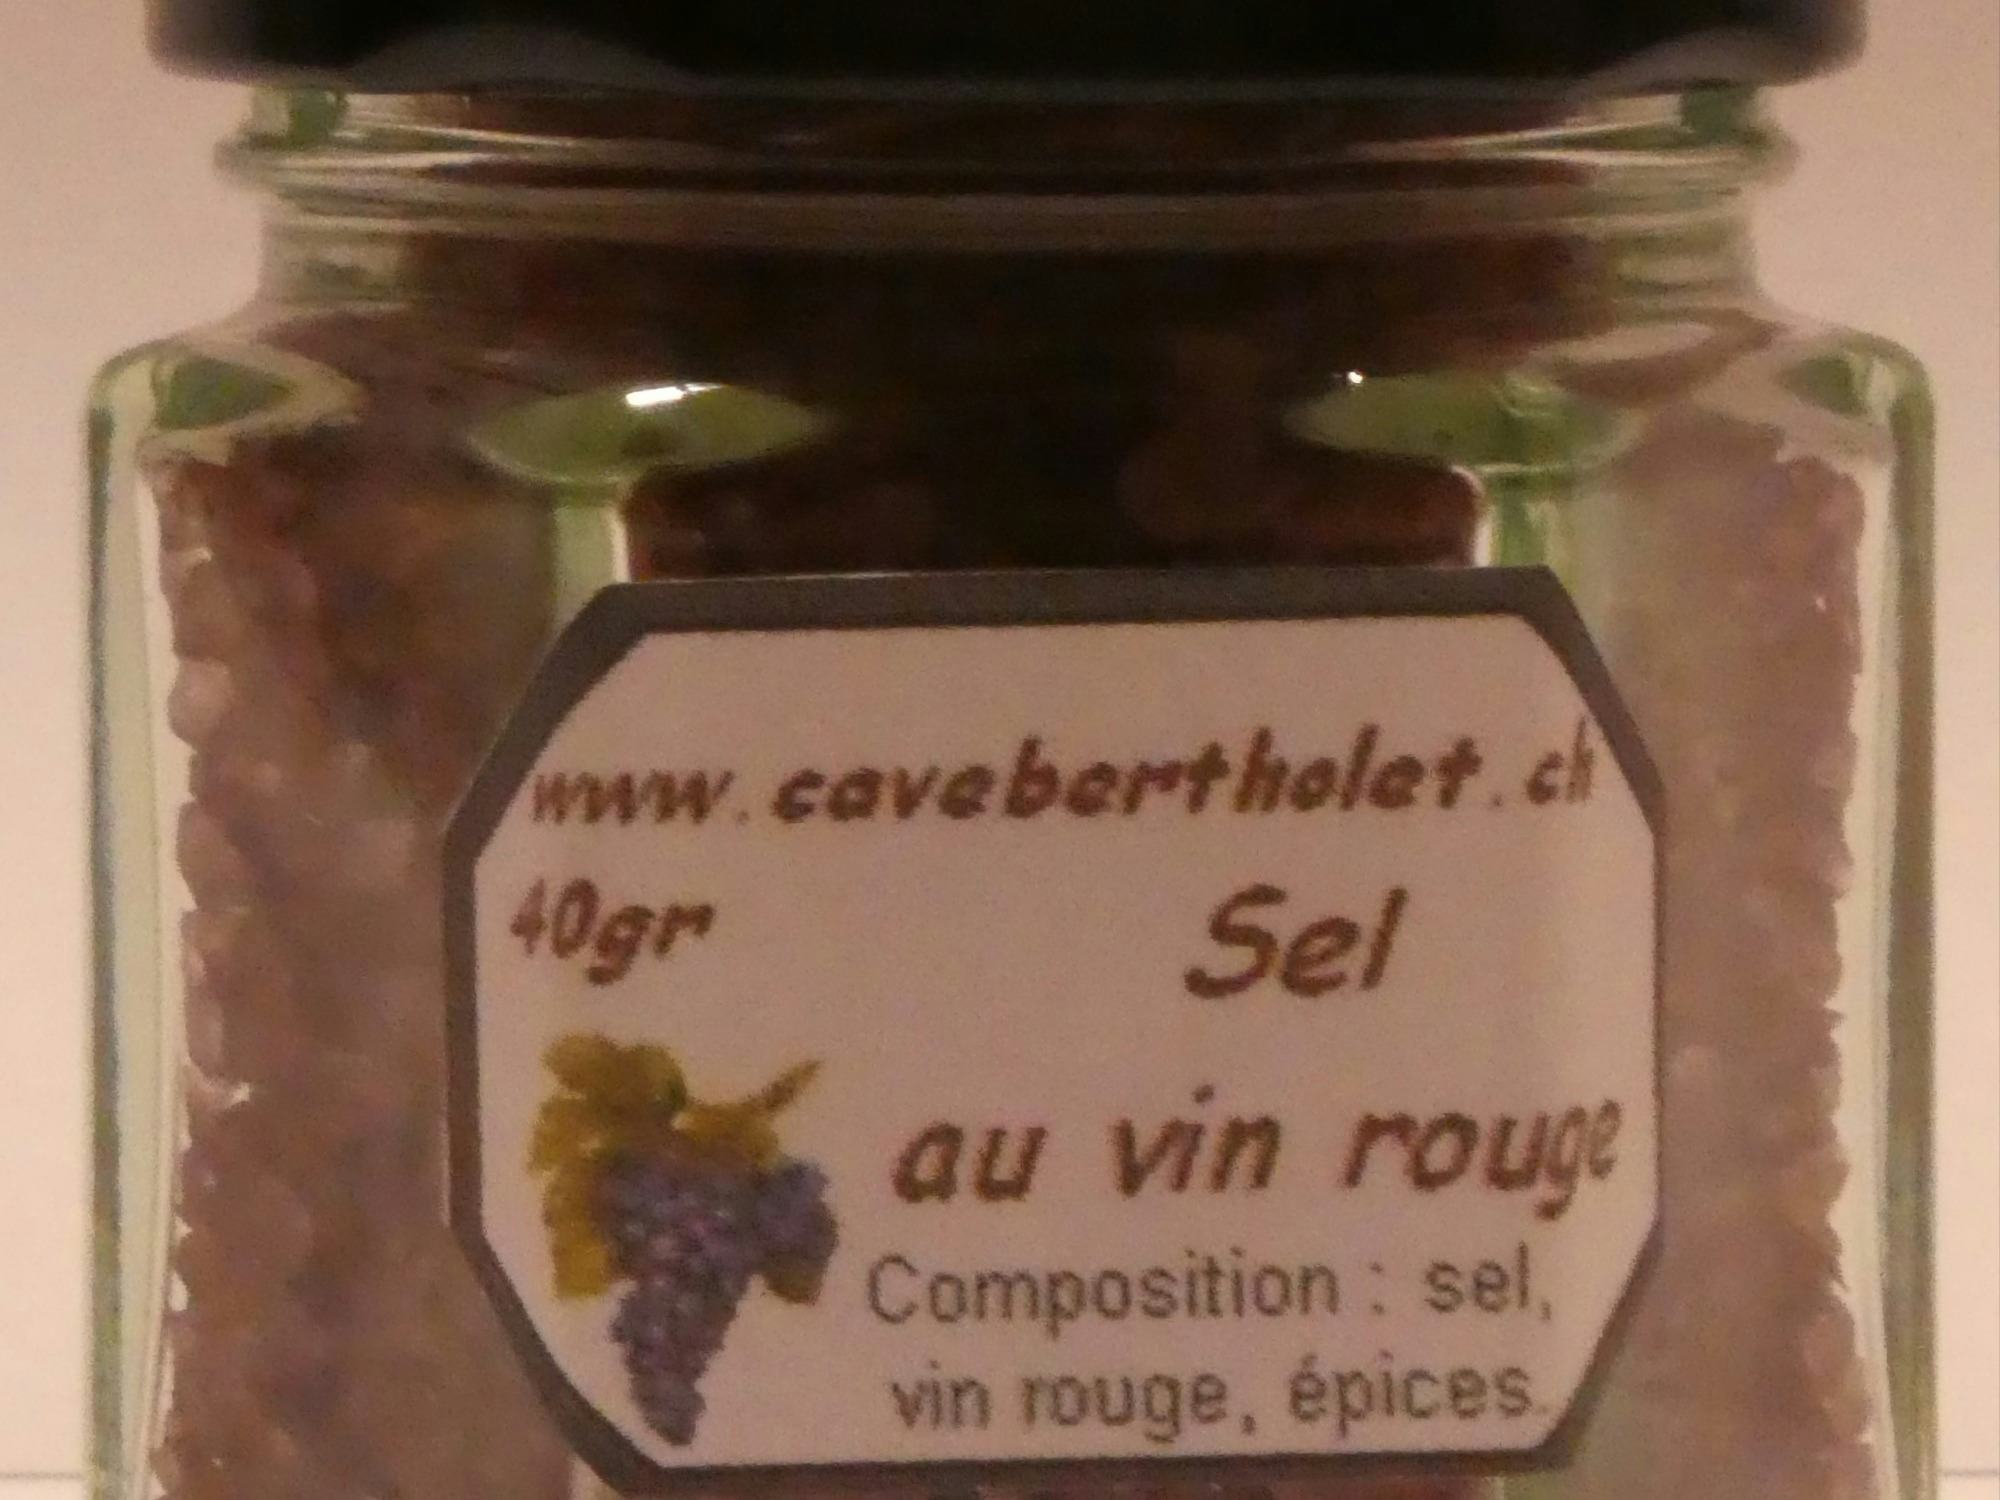 Sel au vin rouge, artisanal product for direct sale in Switzerland